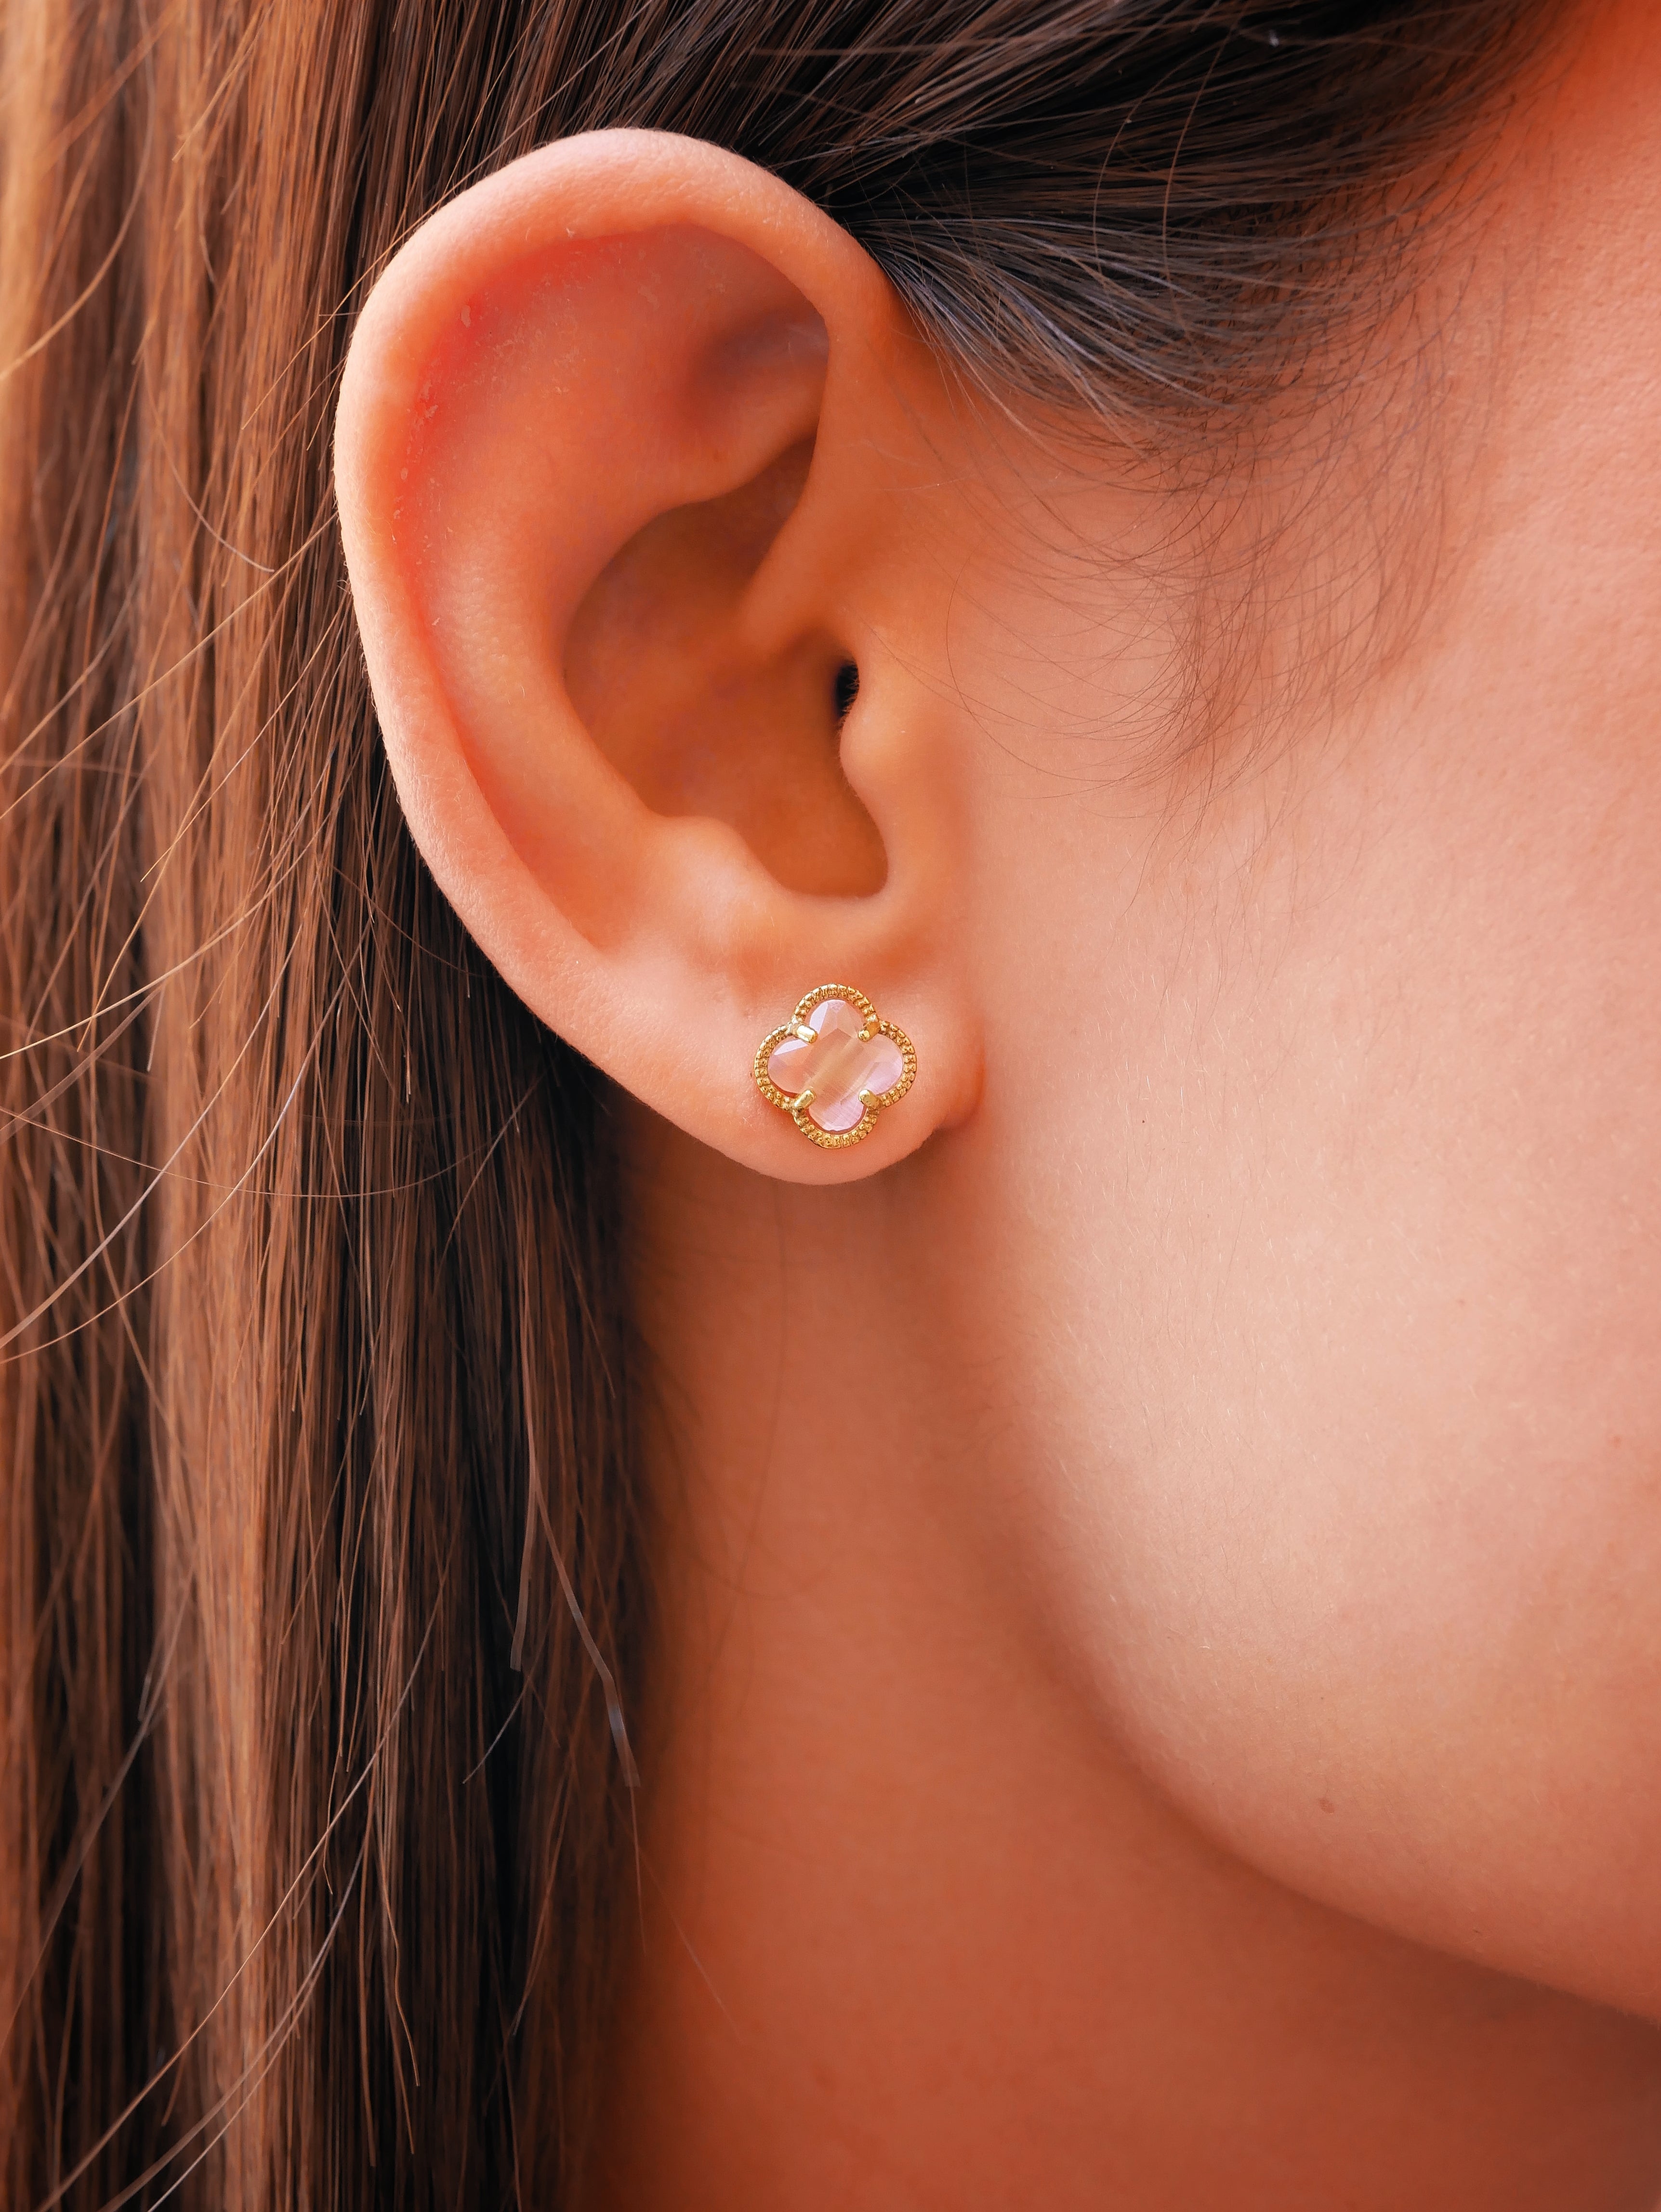 CLOVERLEAF Silver Earrings with Pink Quartz